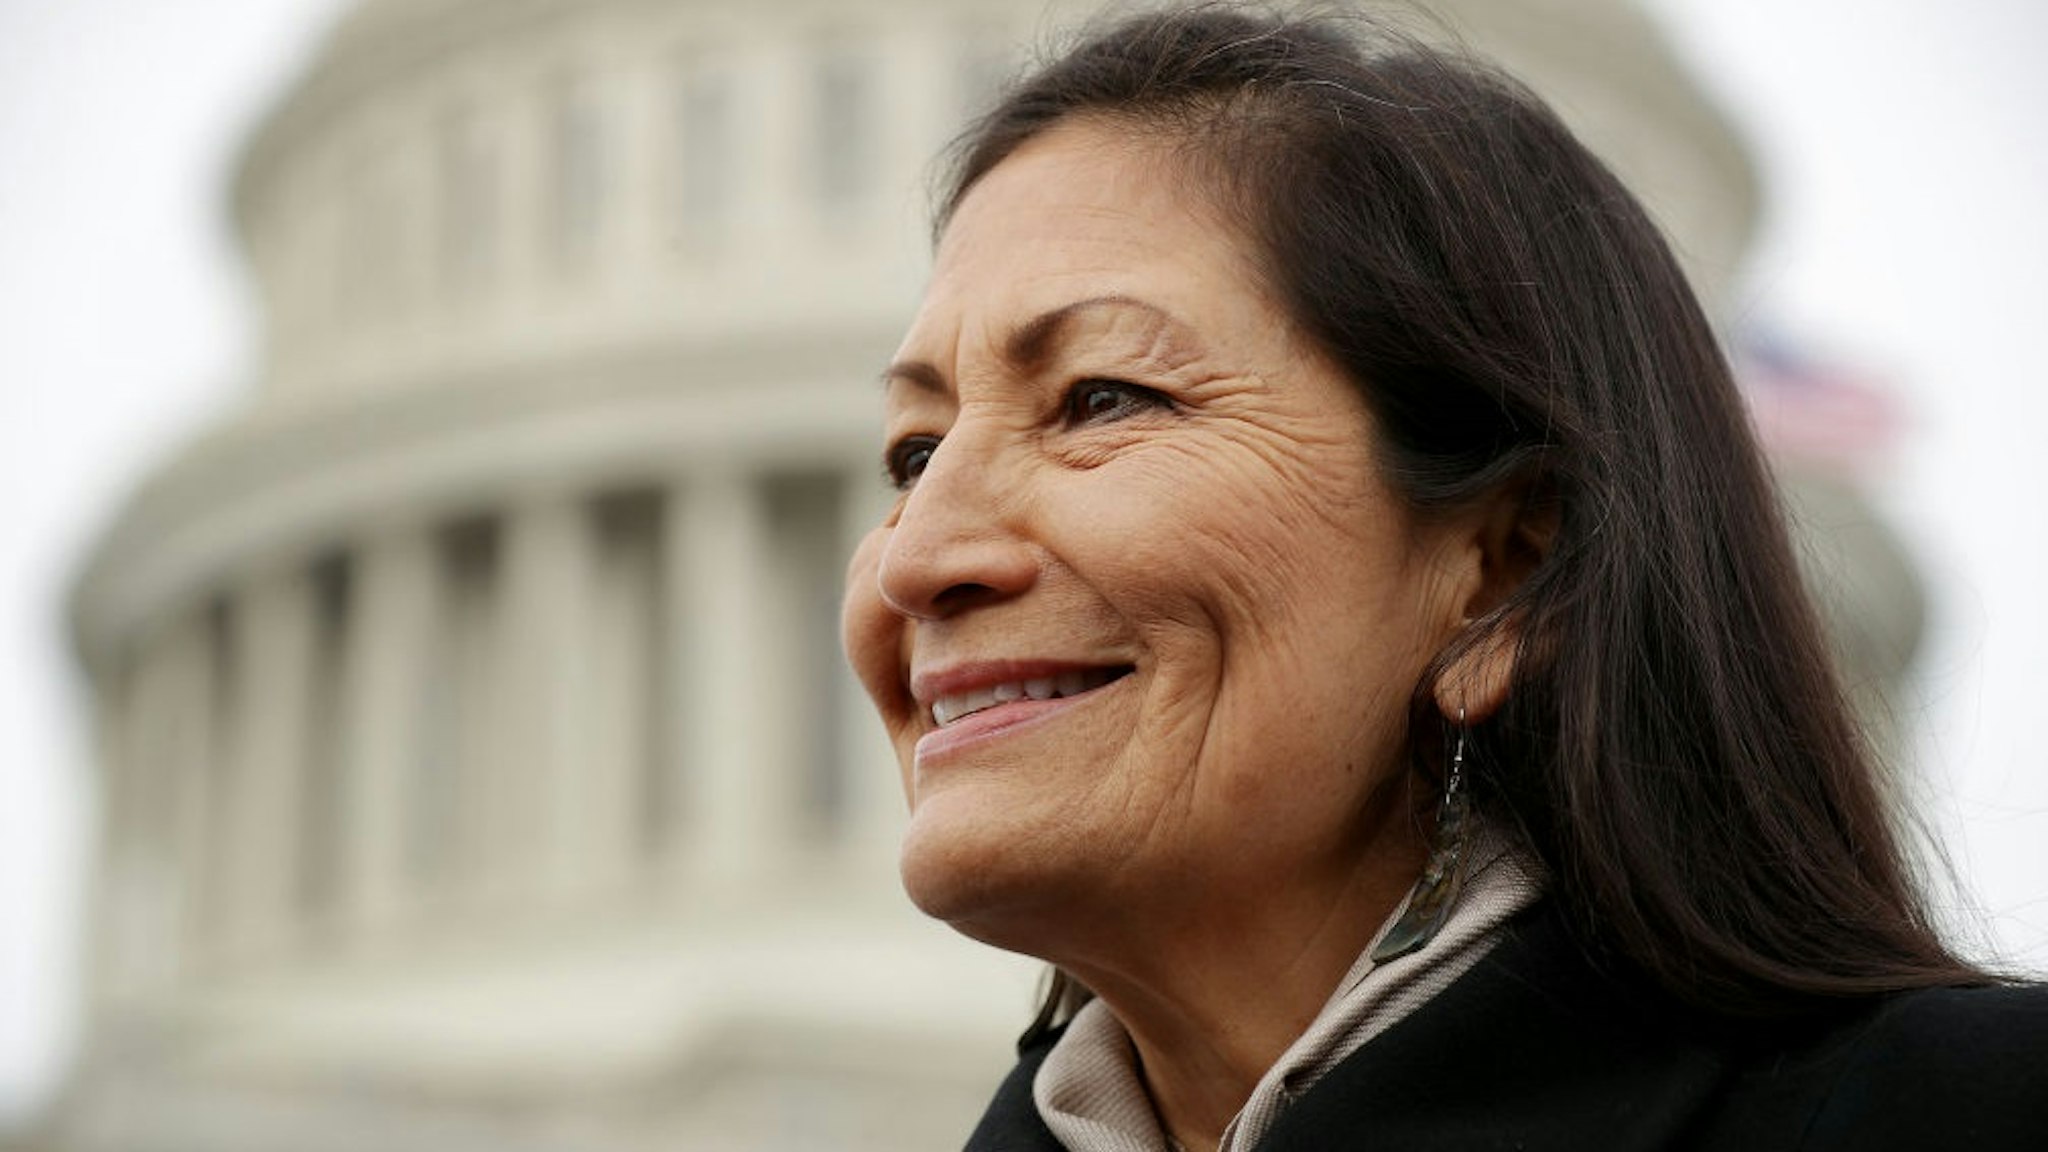 WASHINGTON, DC - JANUARY 04: Rep. Debra Haaland (D-NM) talks with reporters after a portrait with her fellow House Democratic women in front of the U.S. Capitol January 04, 2019 in Washington, DC.